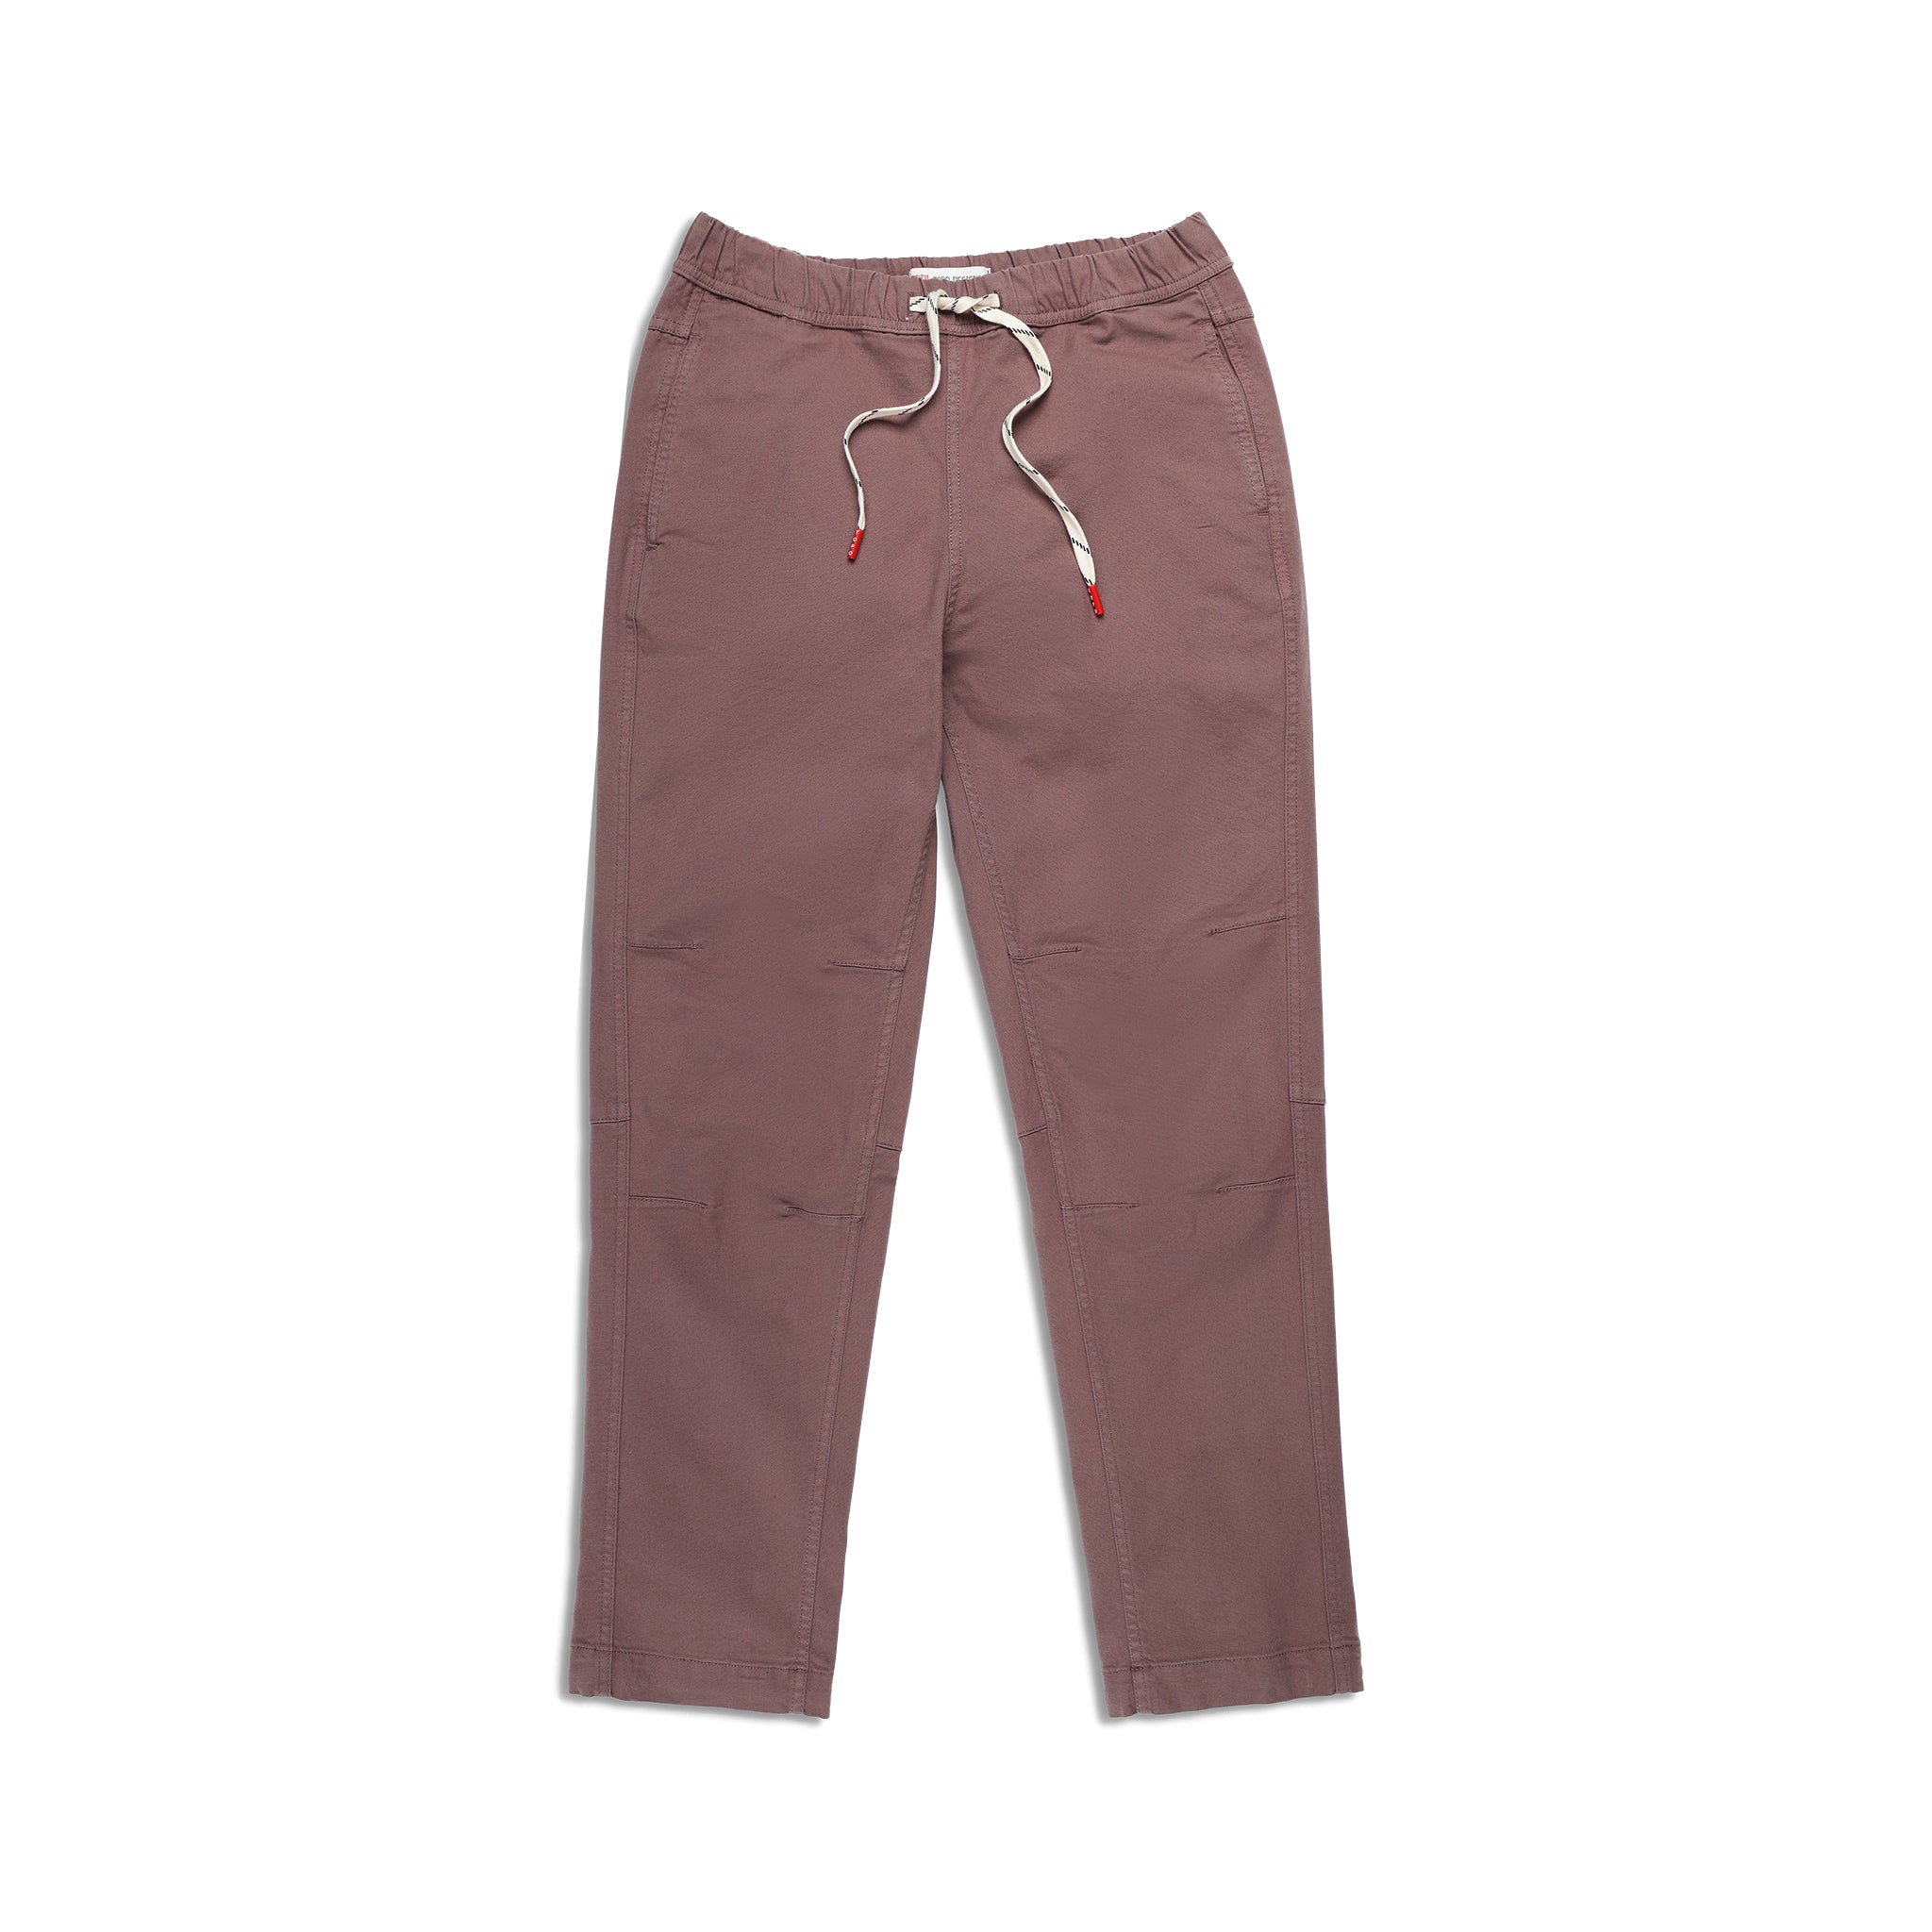 Front View of Topo Designs Dirt Pants Classic - Women's in "Peppercorn"